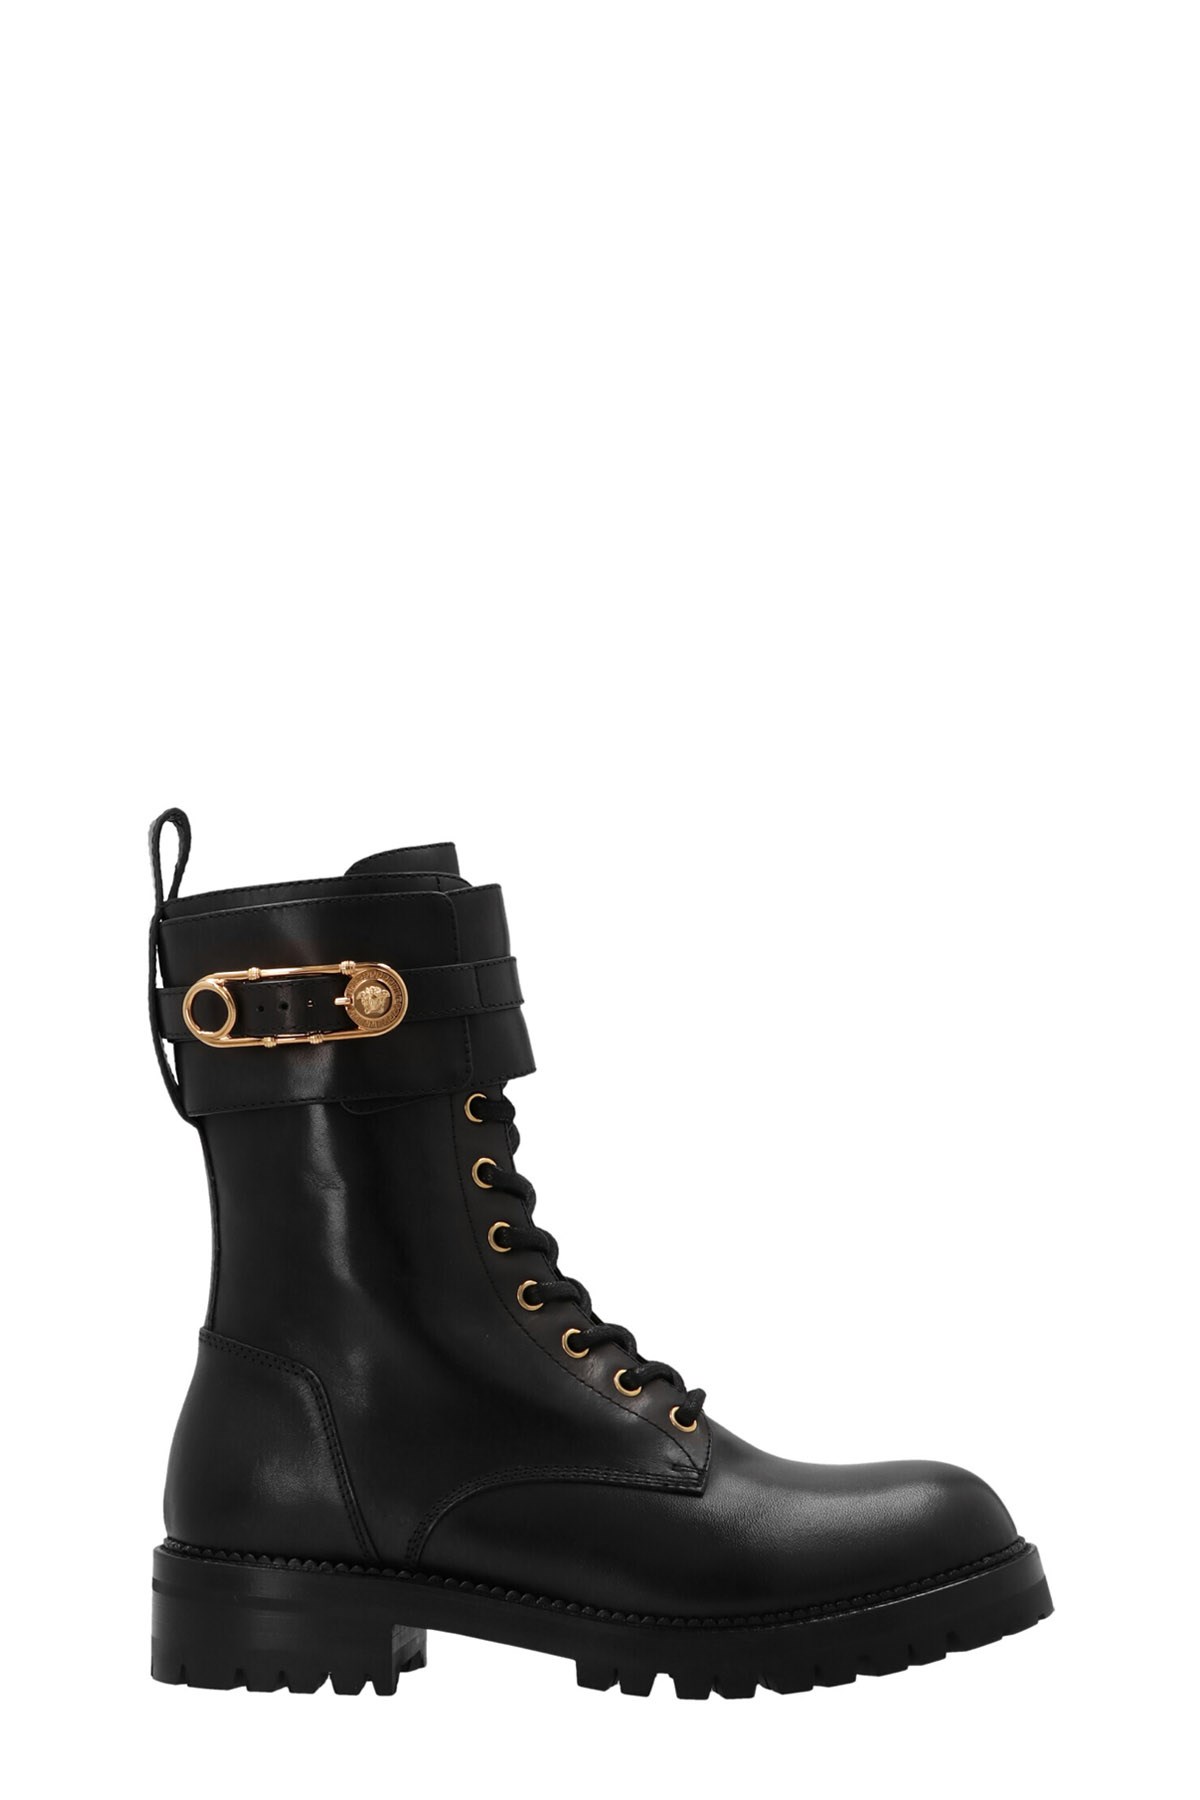 VERSACE 'Safety Pin' Boots